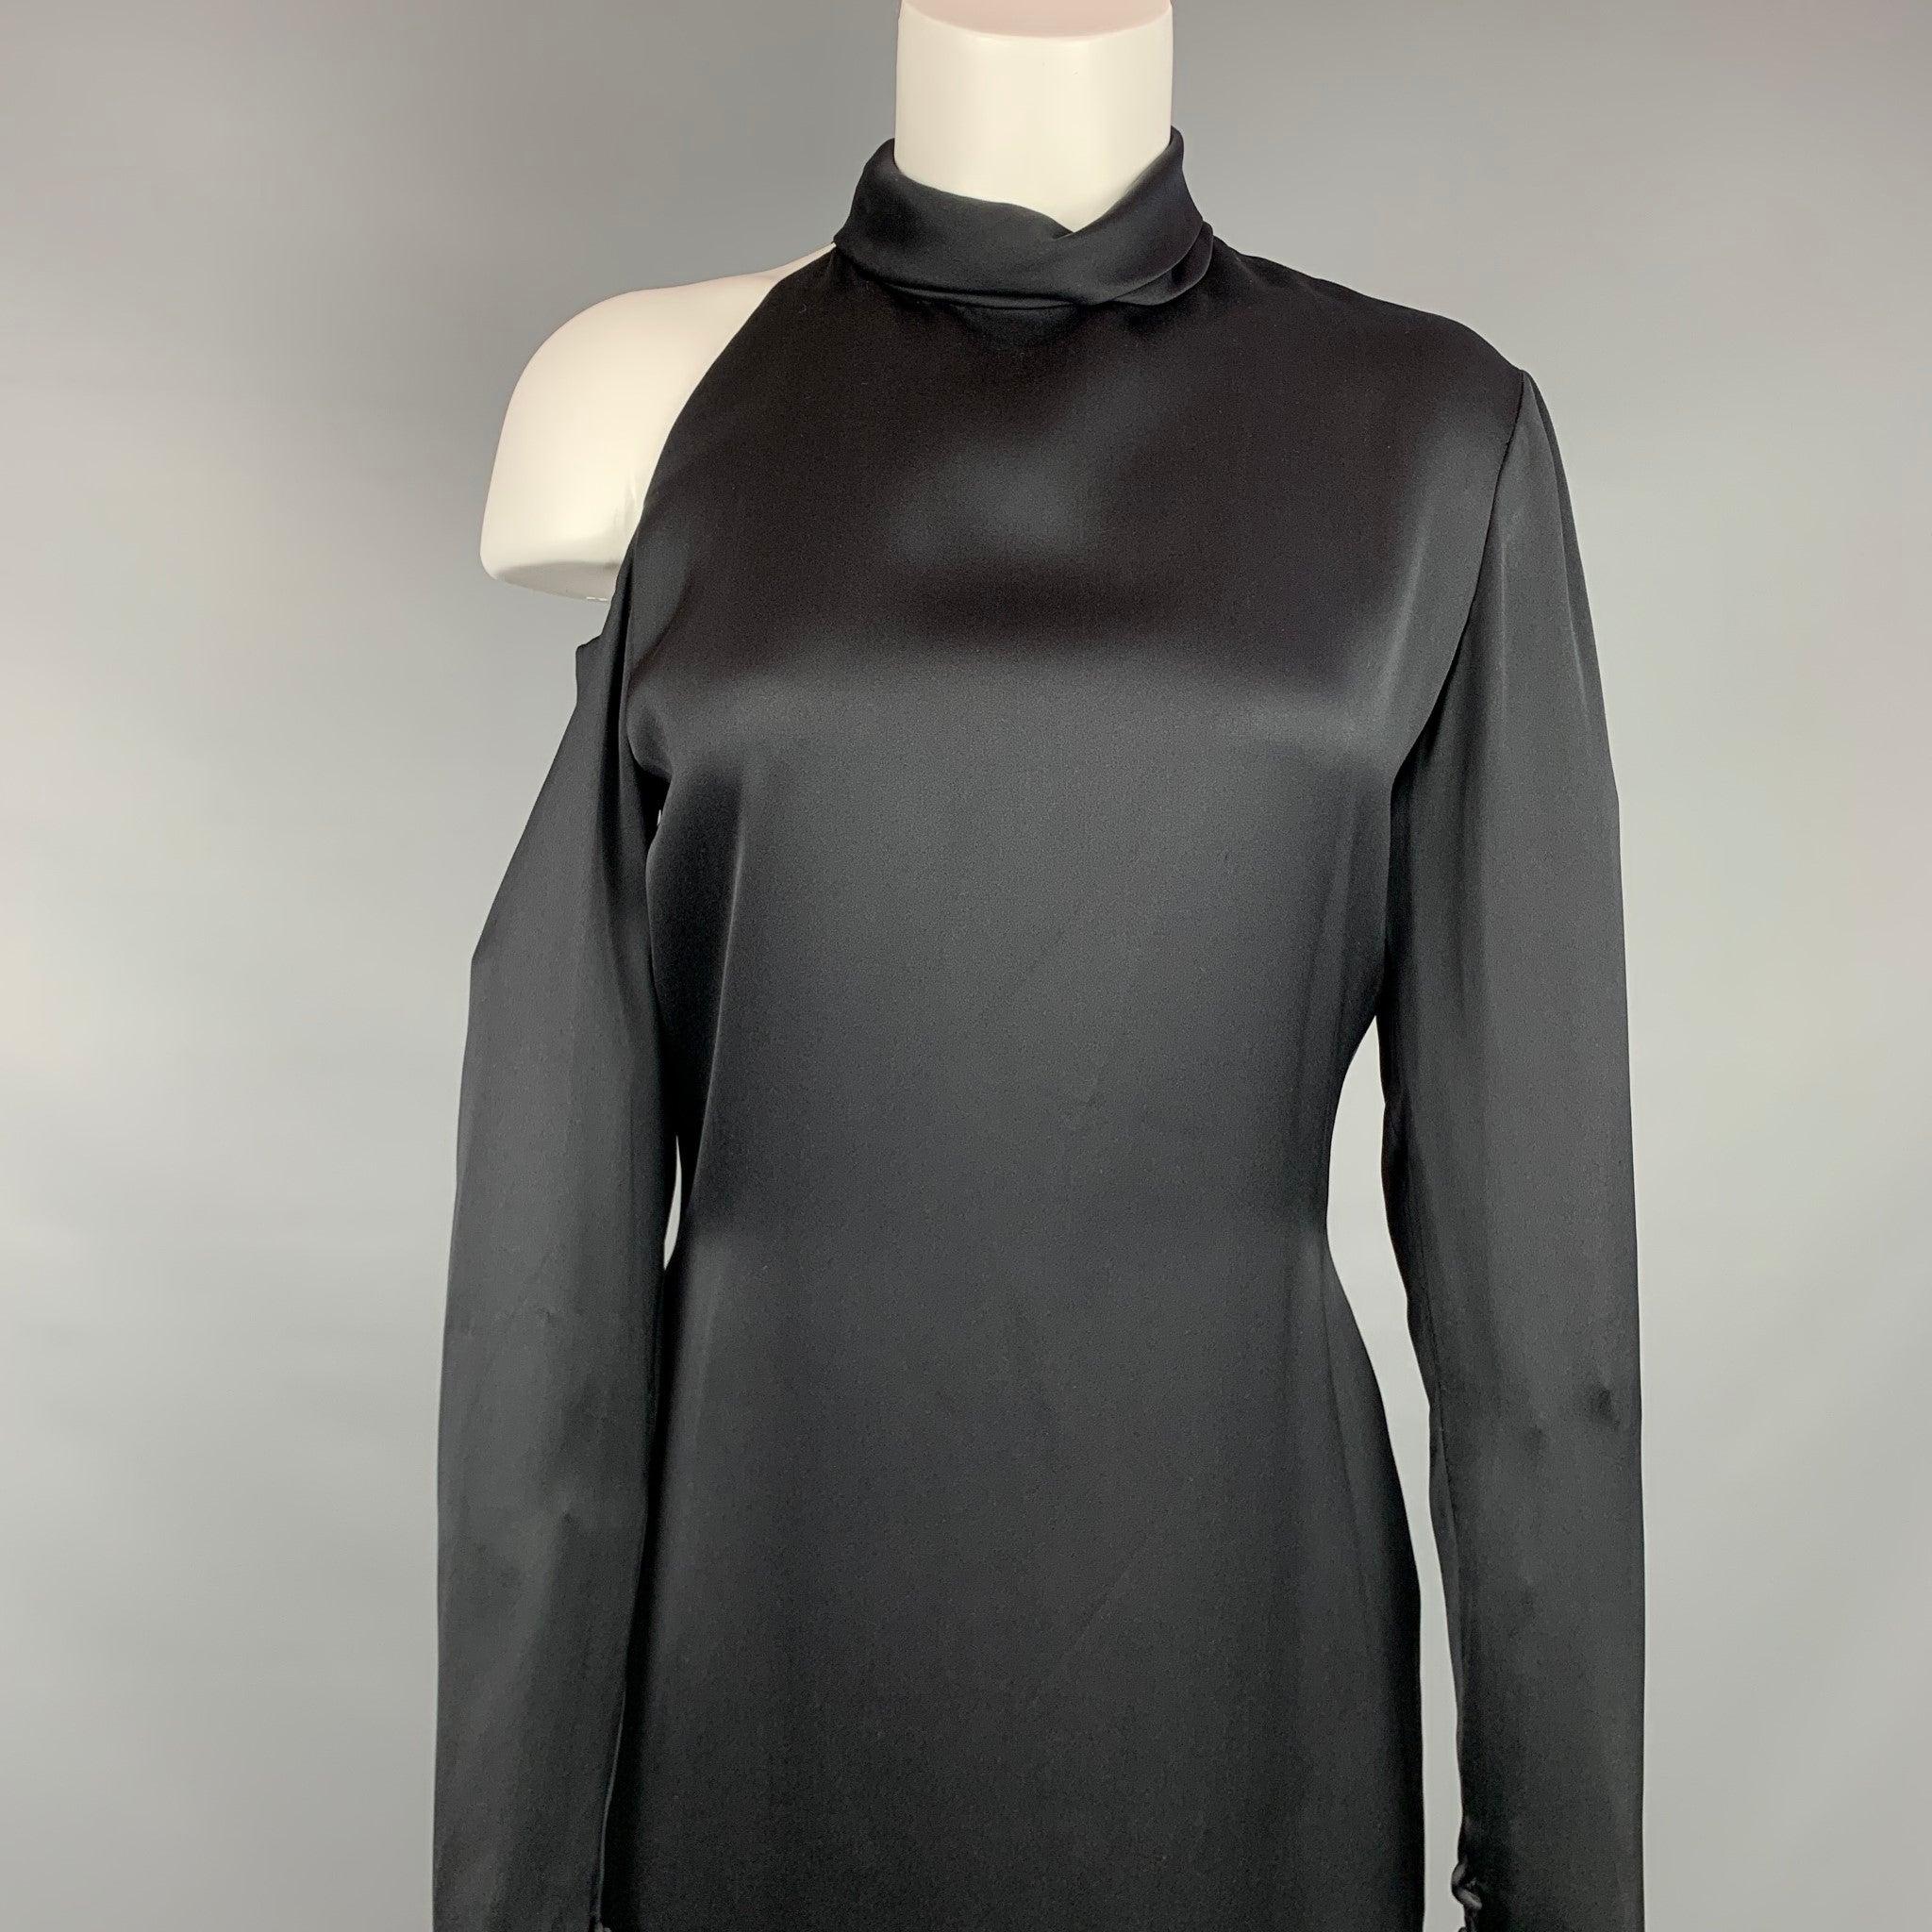 BILL BLASS cocktail dress comes in a black silk featuring a turtleneck, shoulder cut out detail, long sleeves, and a back zipper closure.
Very Good
Pre-Owned Condition. 

Marked:  Size tag removed. 

Measurements: 
 
Shoulder: 5 inches Bust: 36